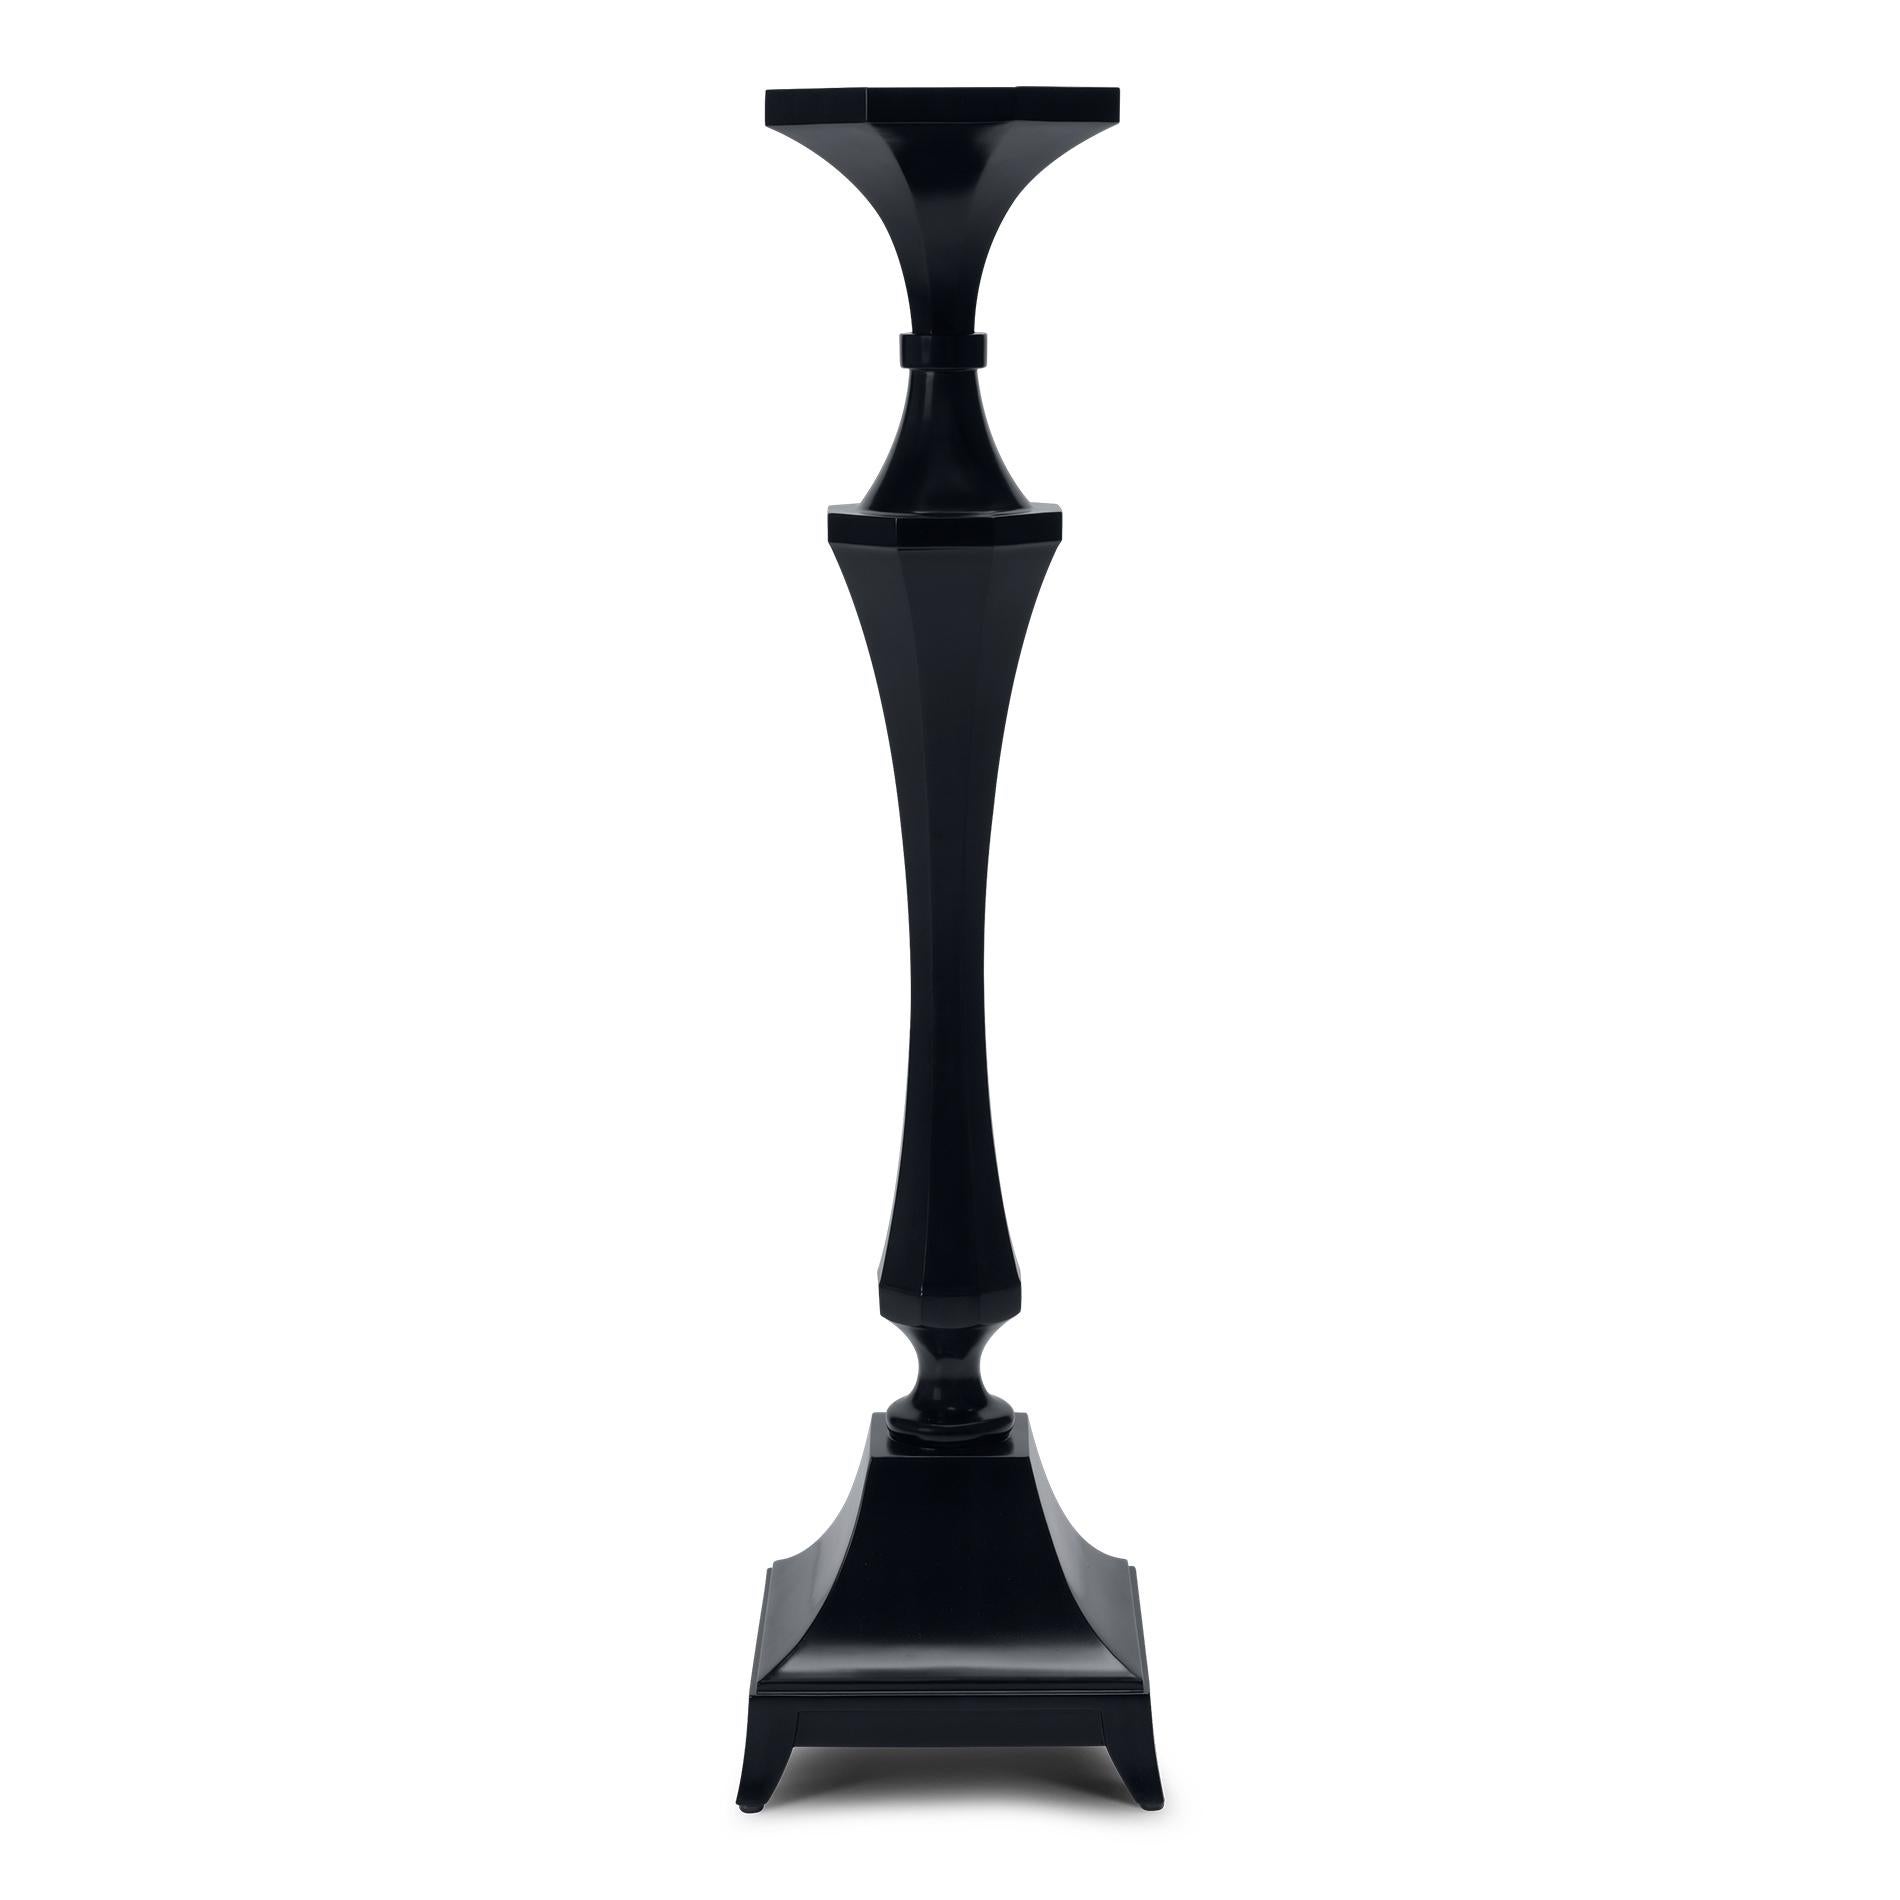 Candleholder bat made in solid mahogany wood
in black satinated finish. For 1 candle, candle not included.
Also available in white lacquered finish, silver leaf finish or
antique gold leaf finish.